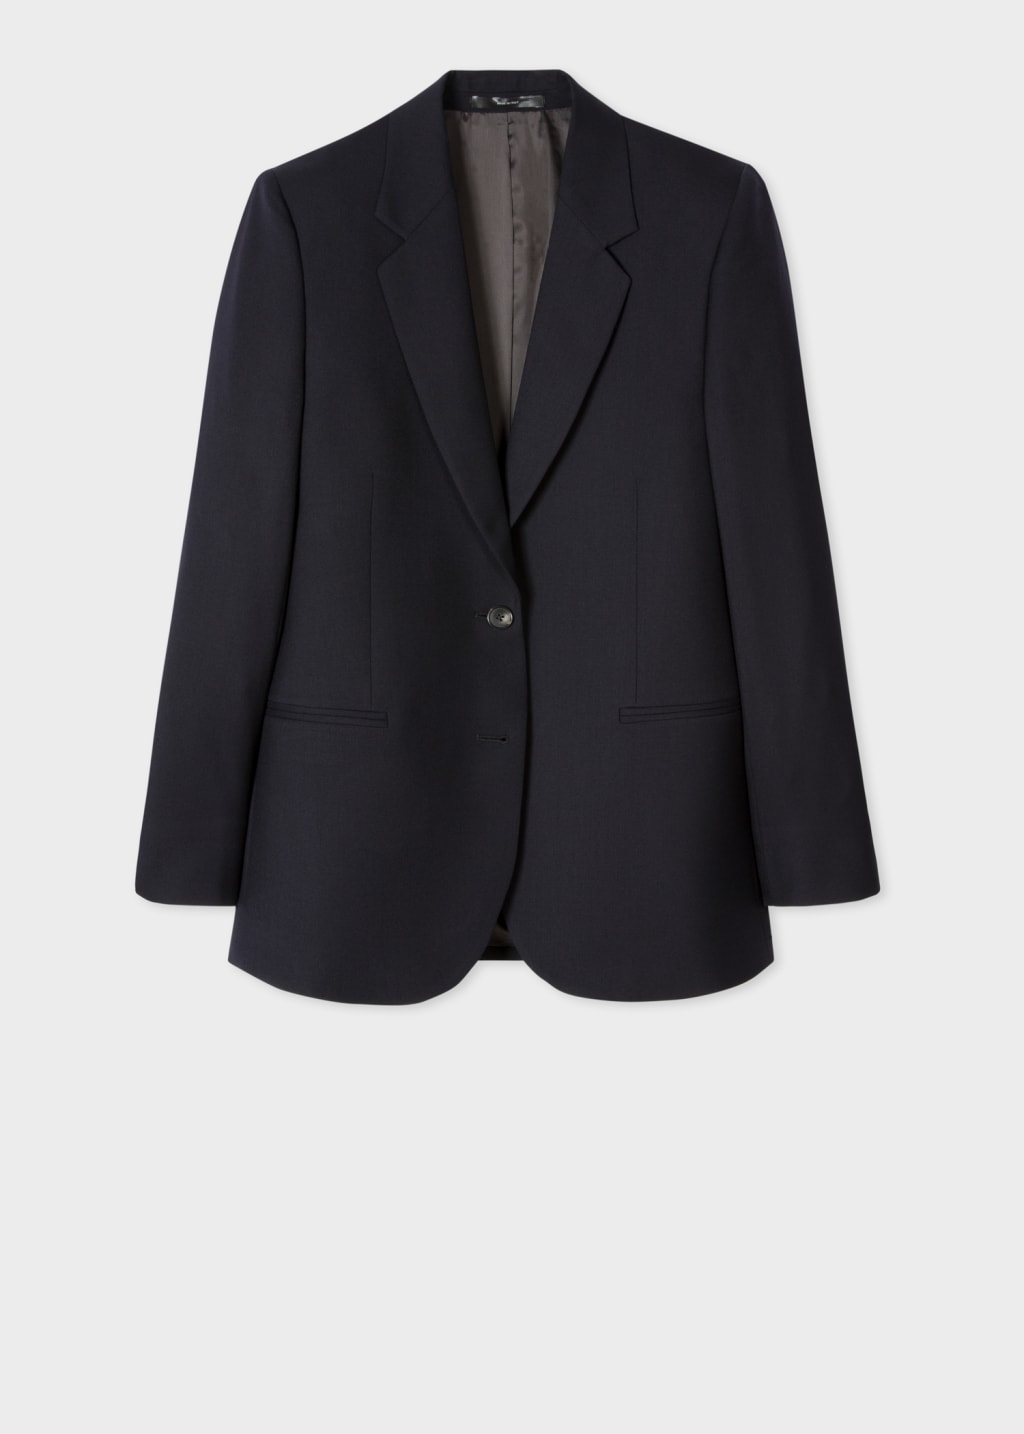 Front View - A Suit To Travel In - Women's Dark Navy Two-Button Wool Blazer Paul Smith